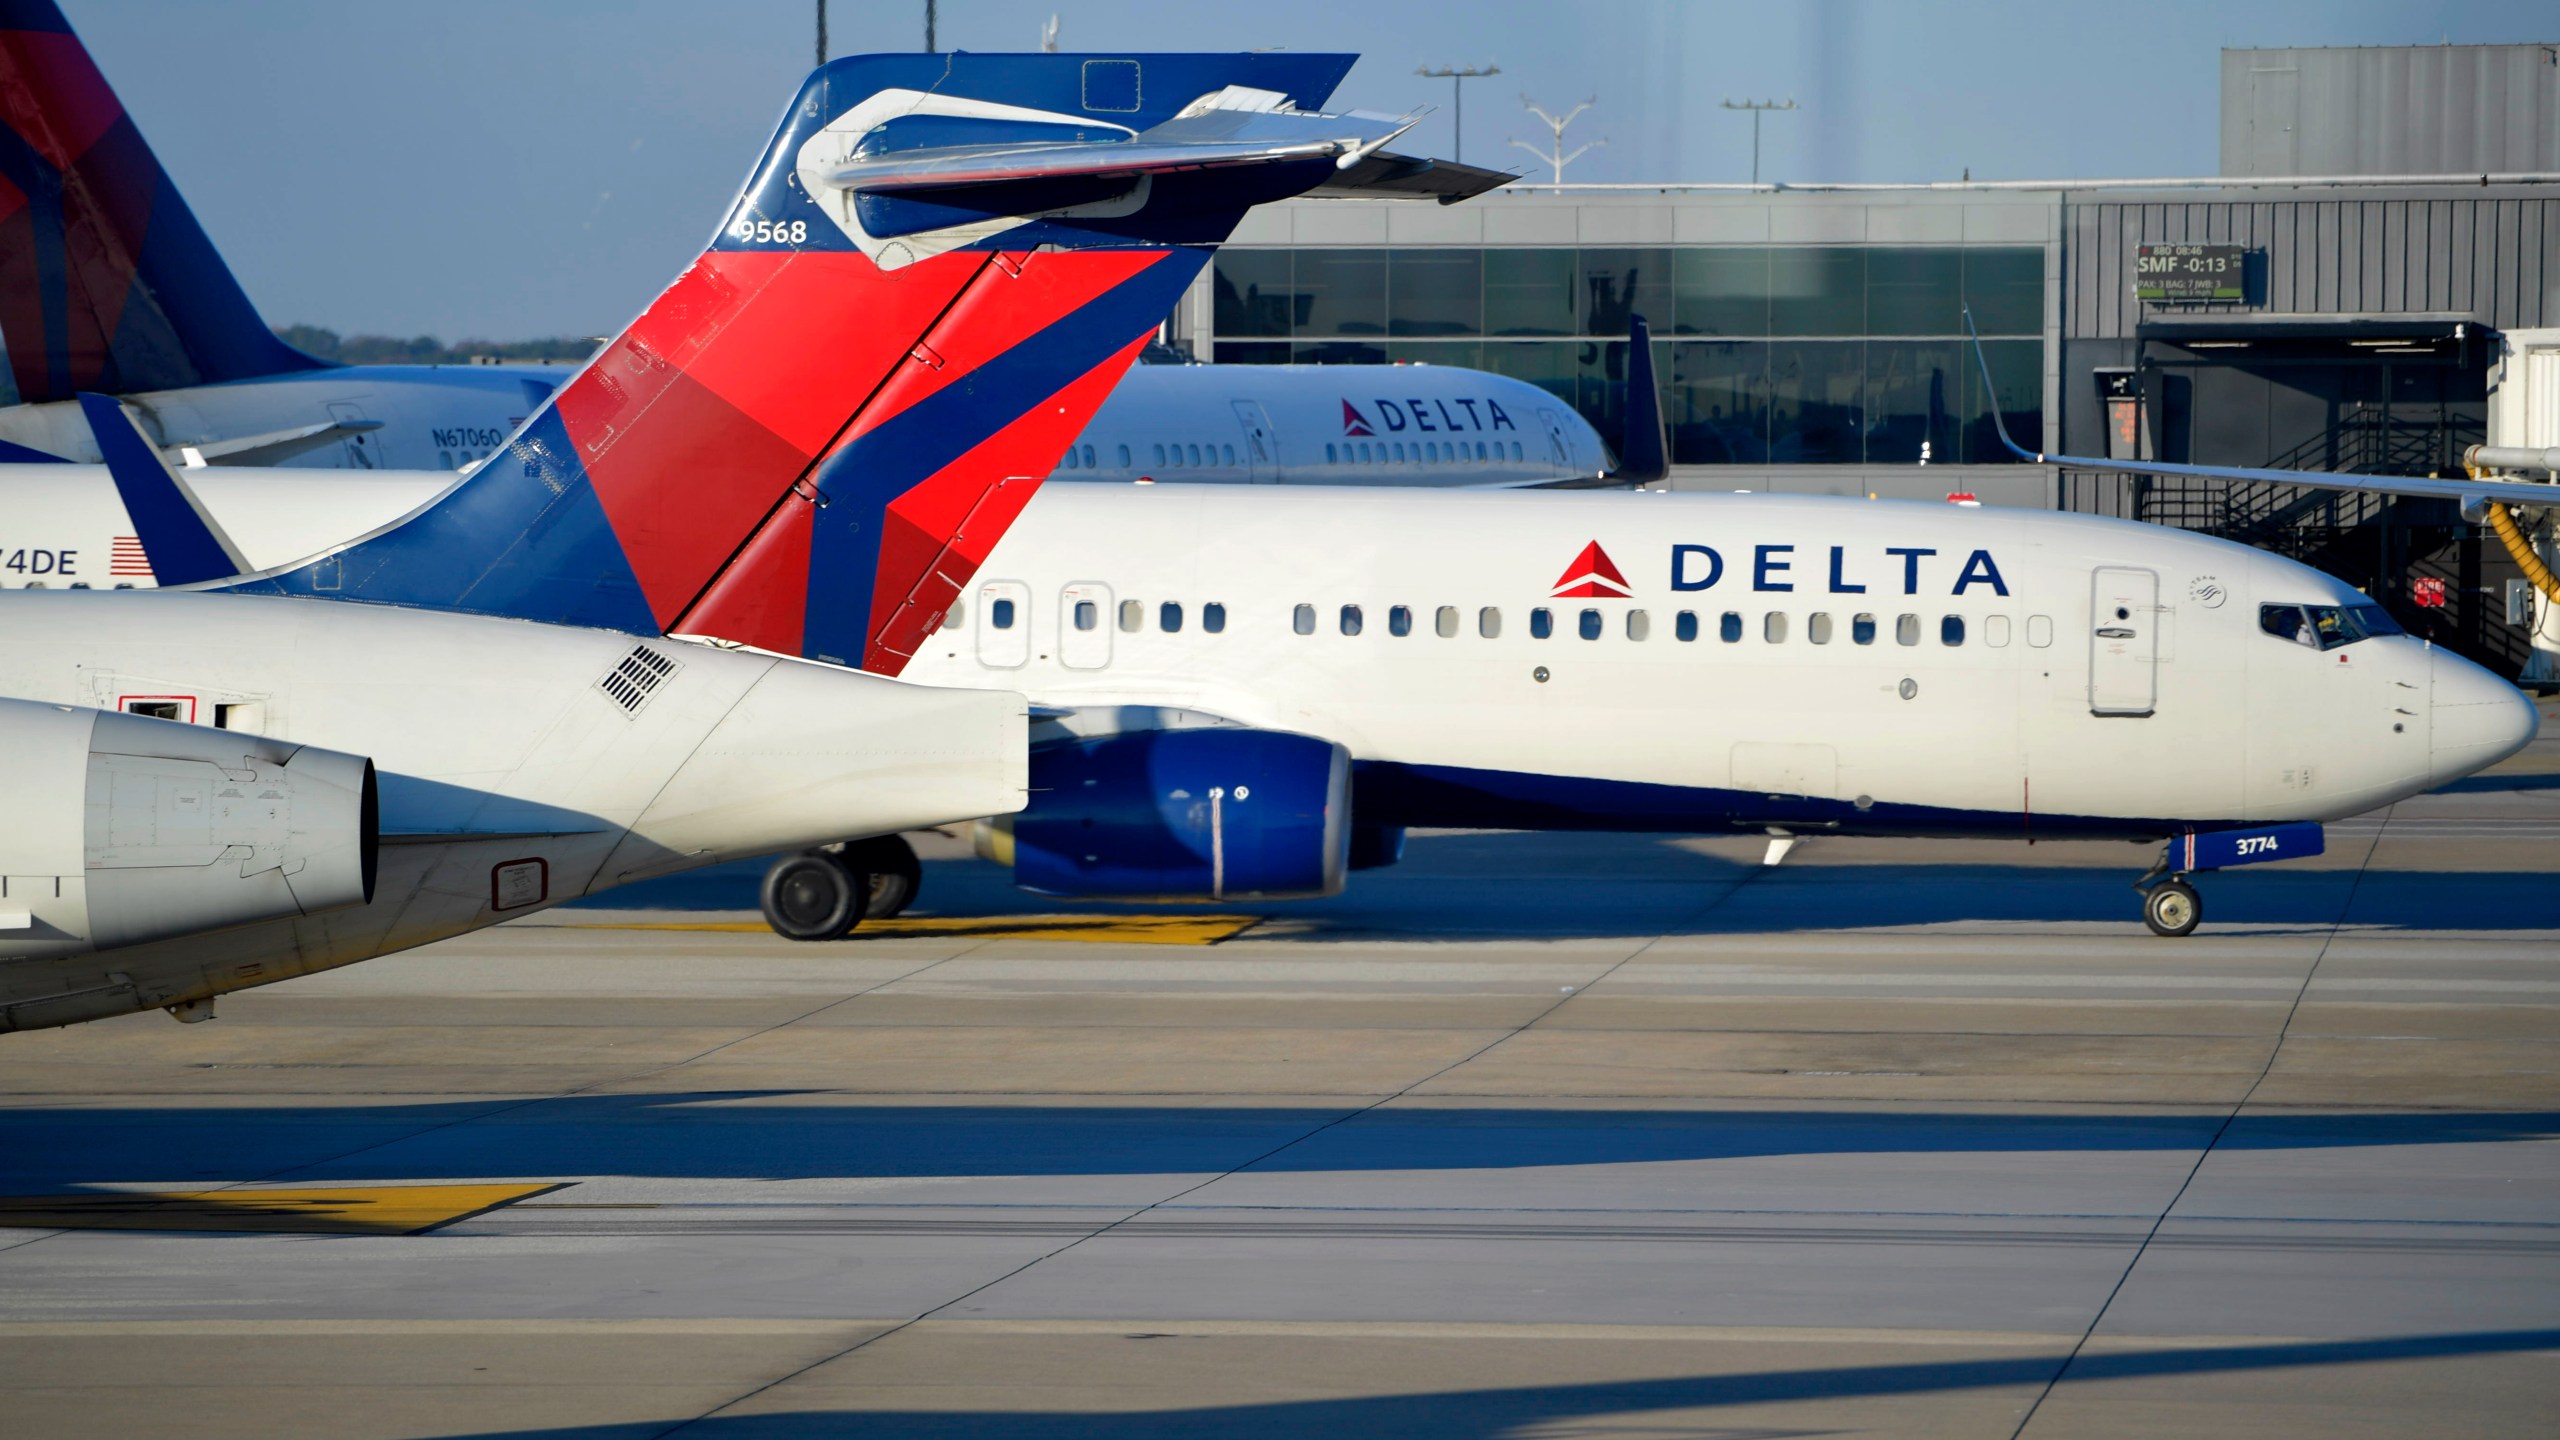 FILE - A Delta Airlines aircraft taxi's, Thursday, Dec. 2, 2021, at Hartsfield-Jackson Atlanta International Airport, in Atlanta. Delta Airlines has just boosted the cost of your first checked bag by 17%. (AP Photo/Mike Stewart, File)